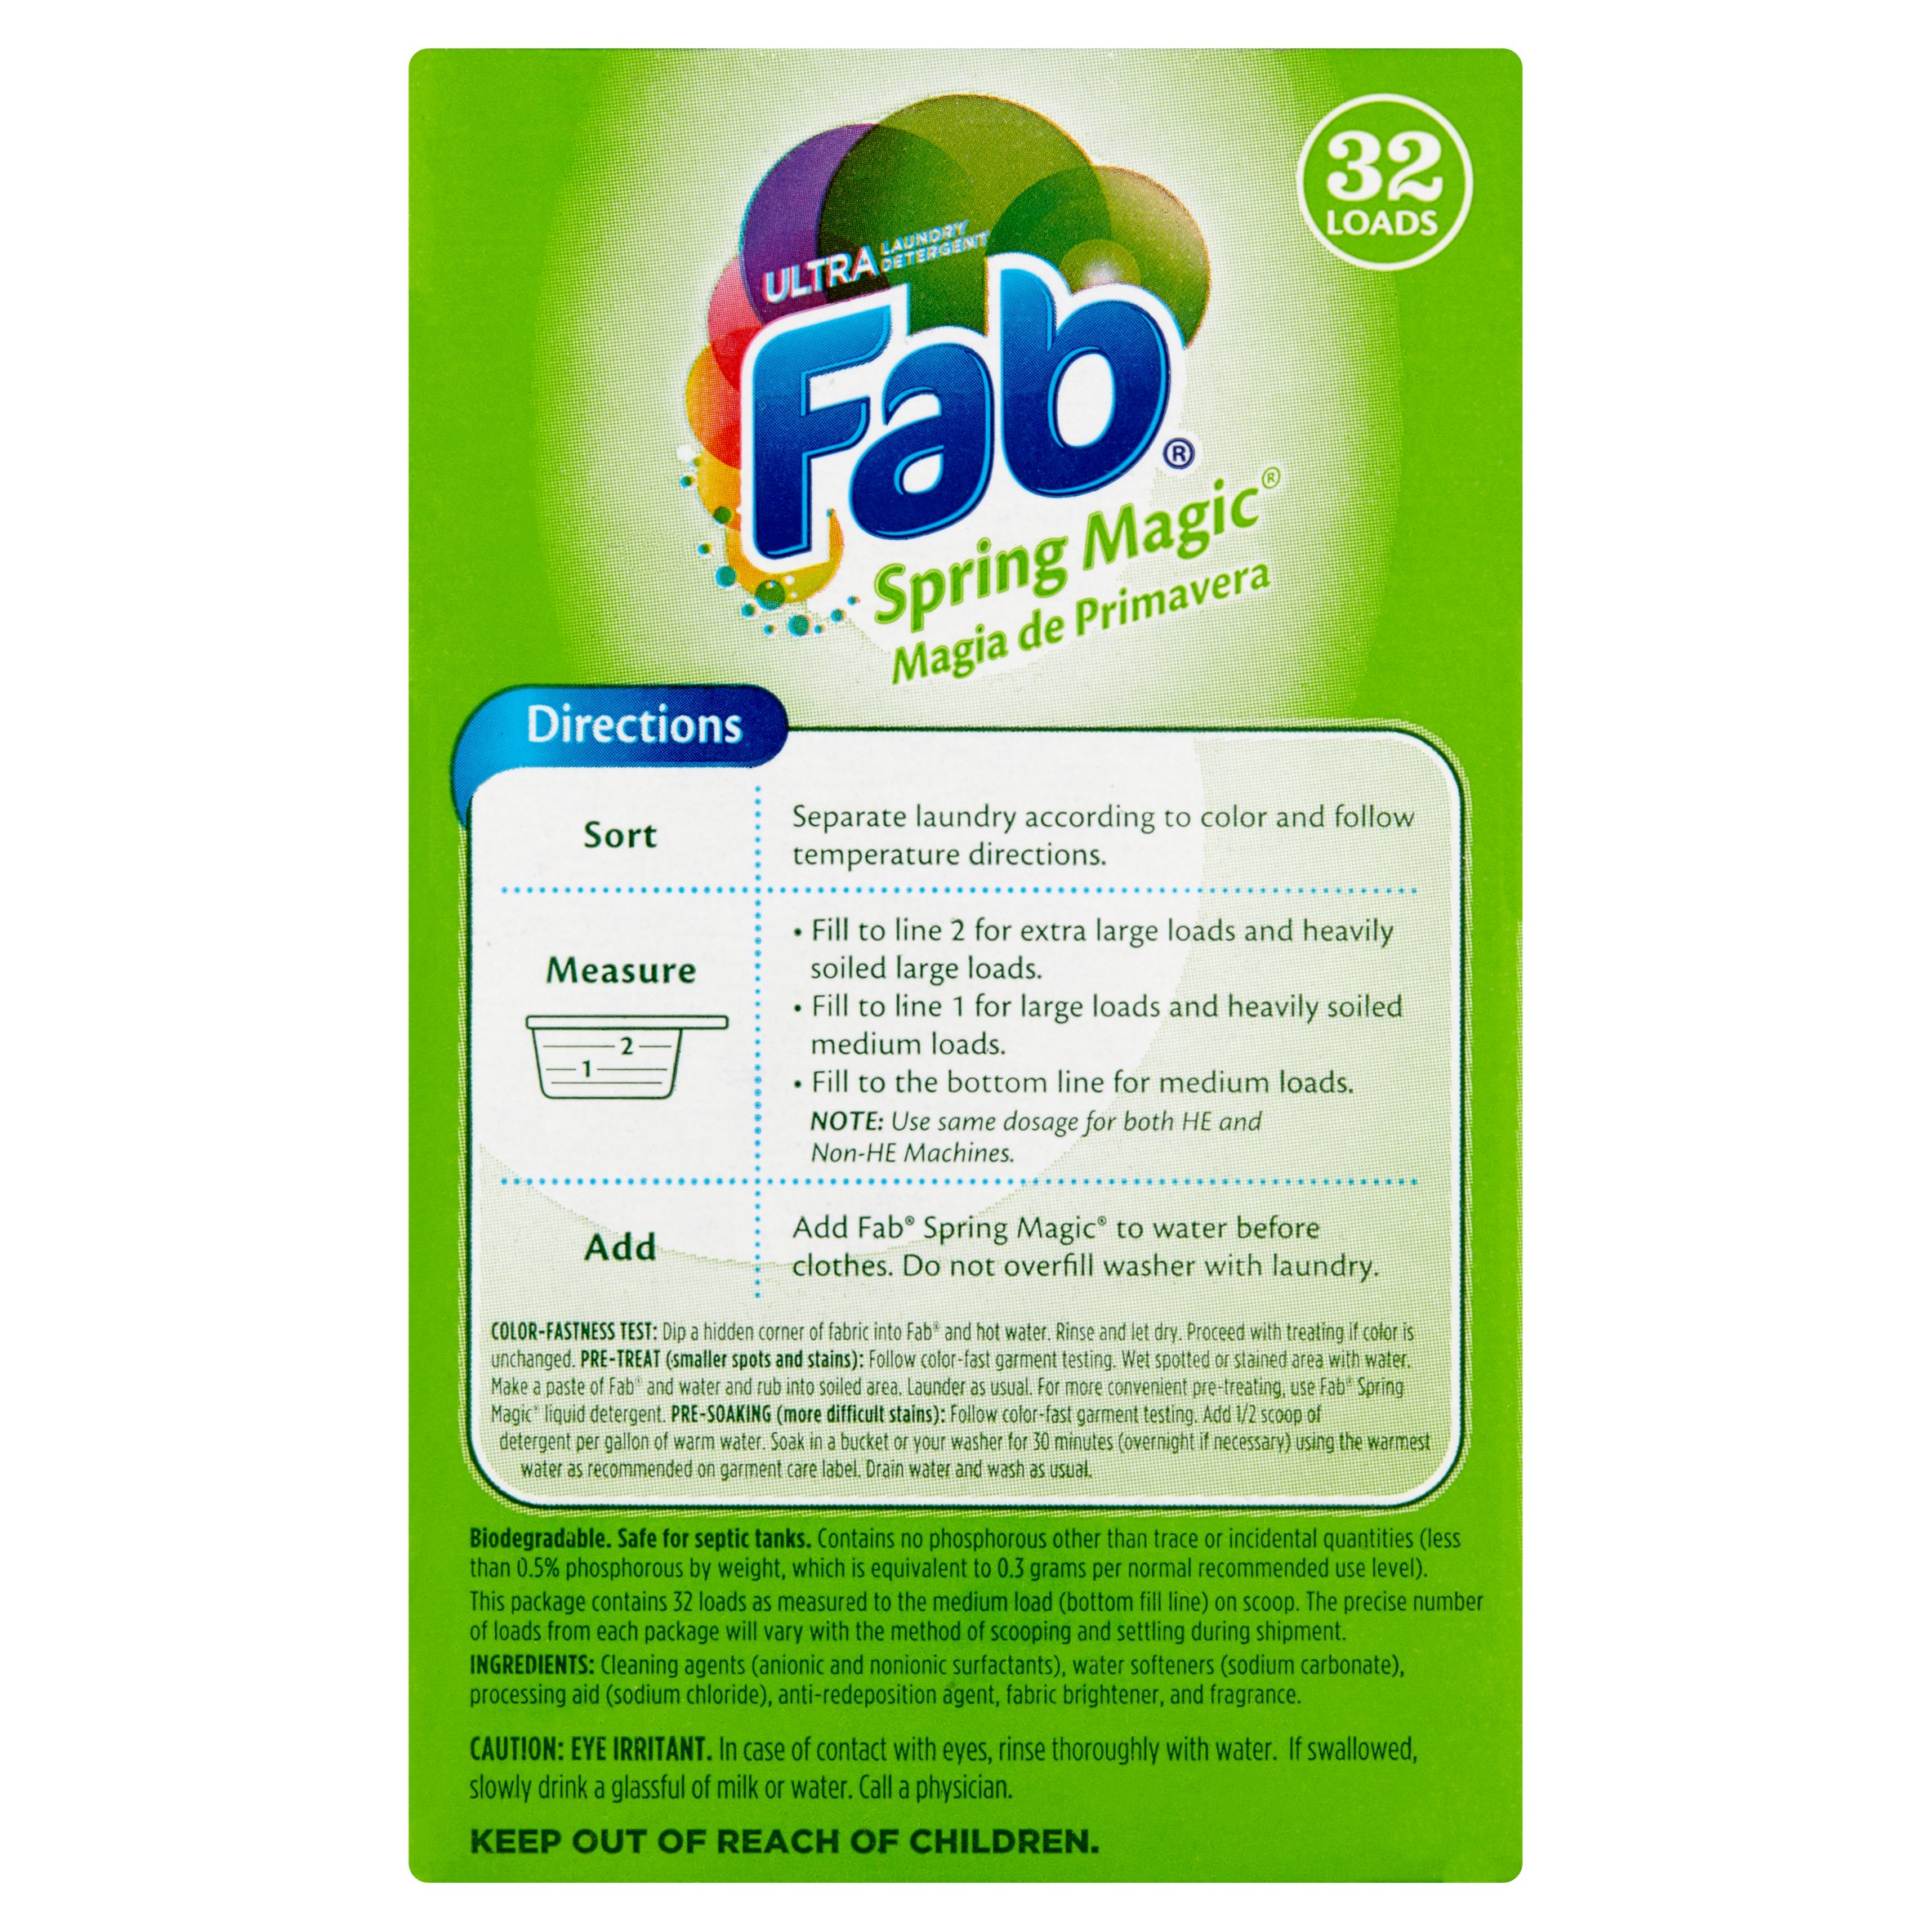 Ultra Fab Spring Magic Powder Laundry Detergent, 2.1 lbs - image 3 of 4